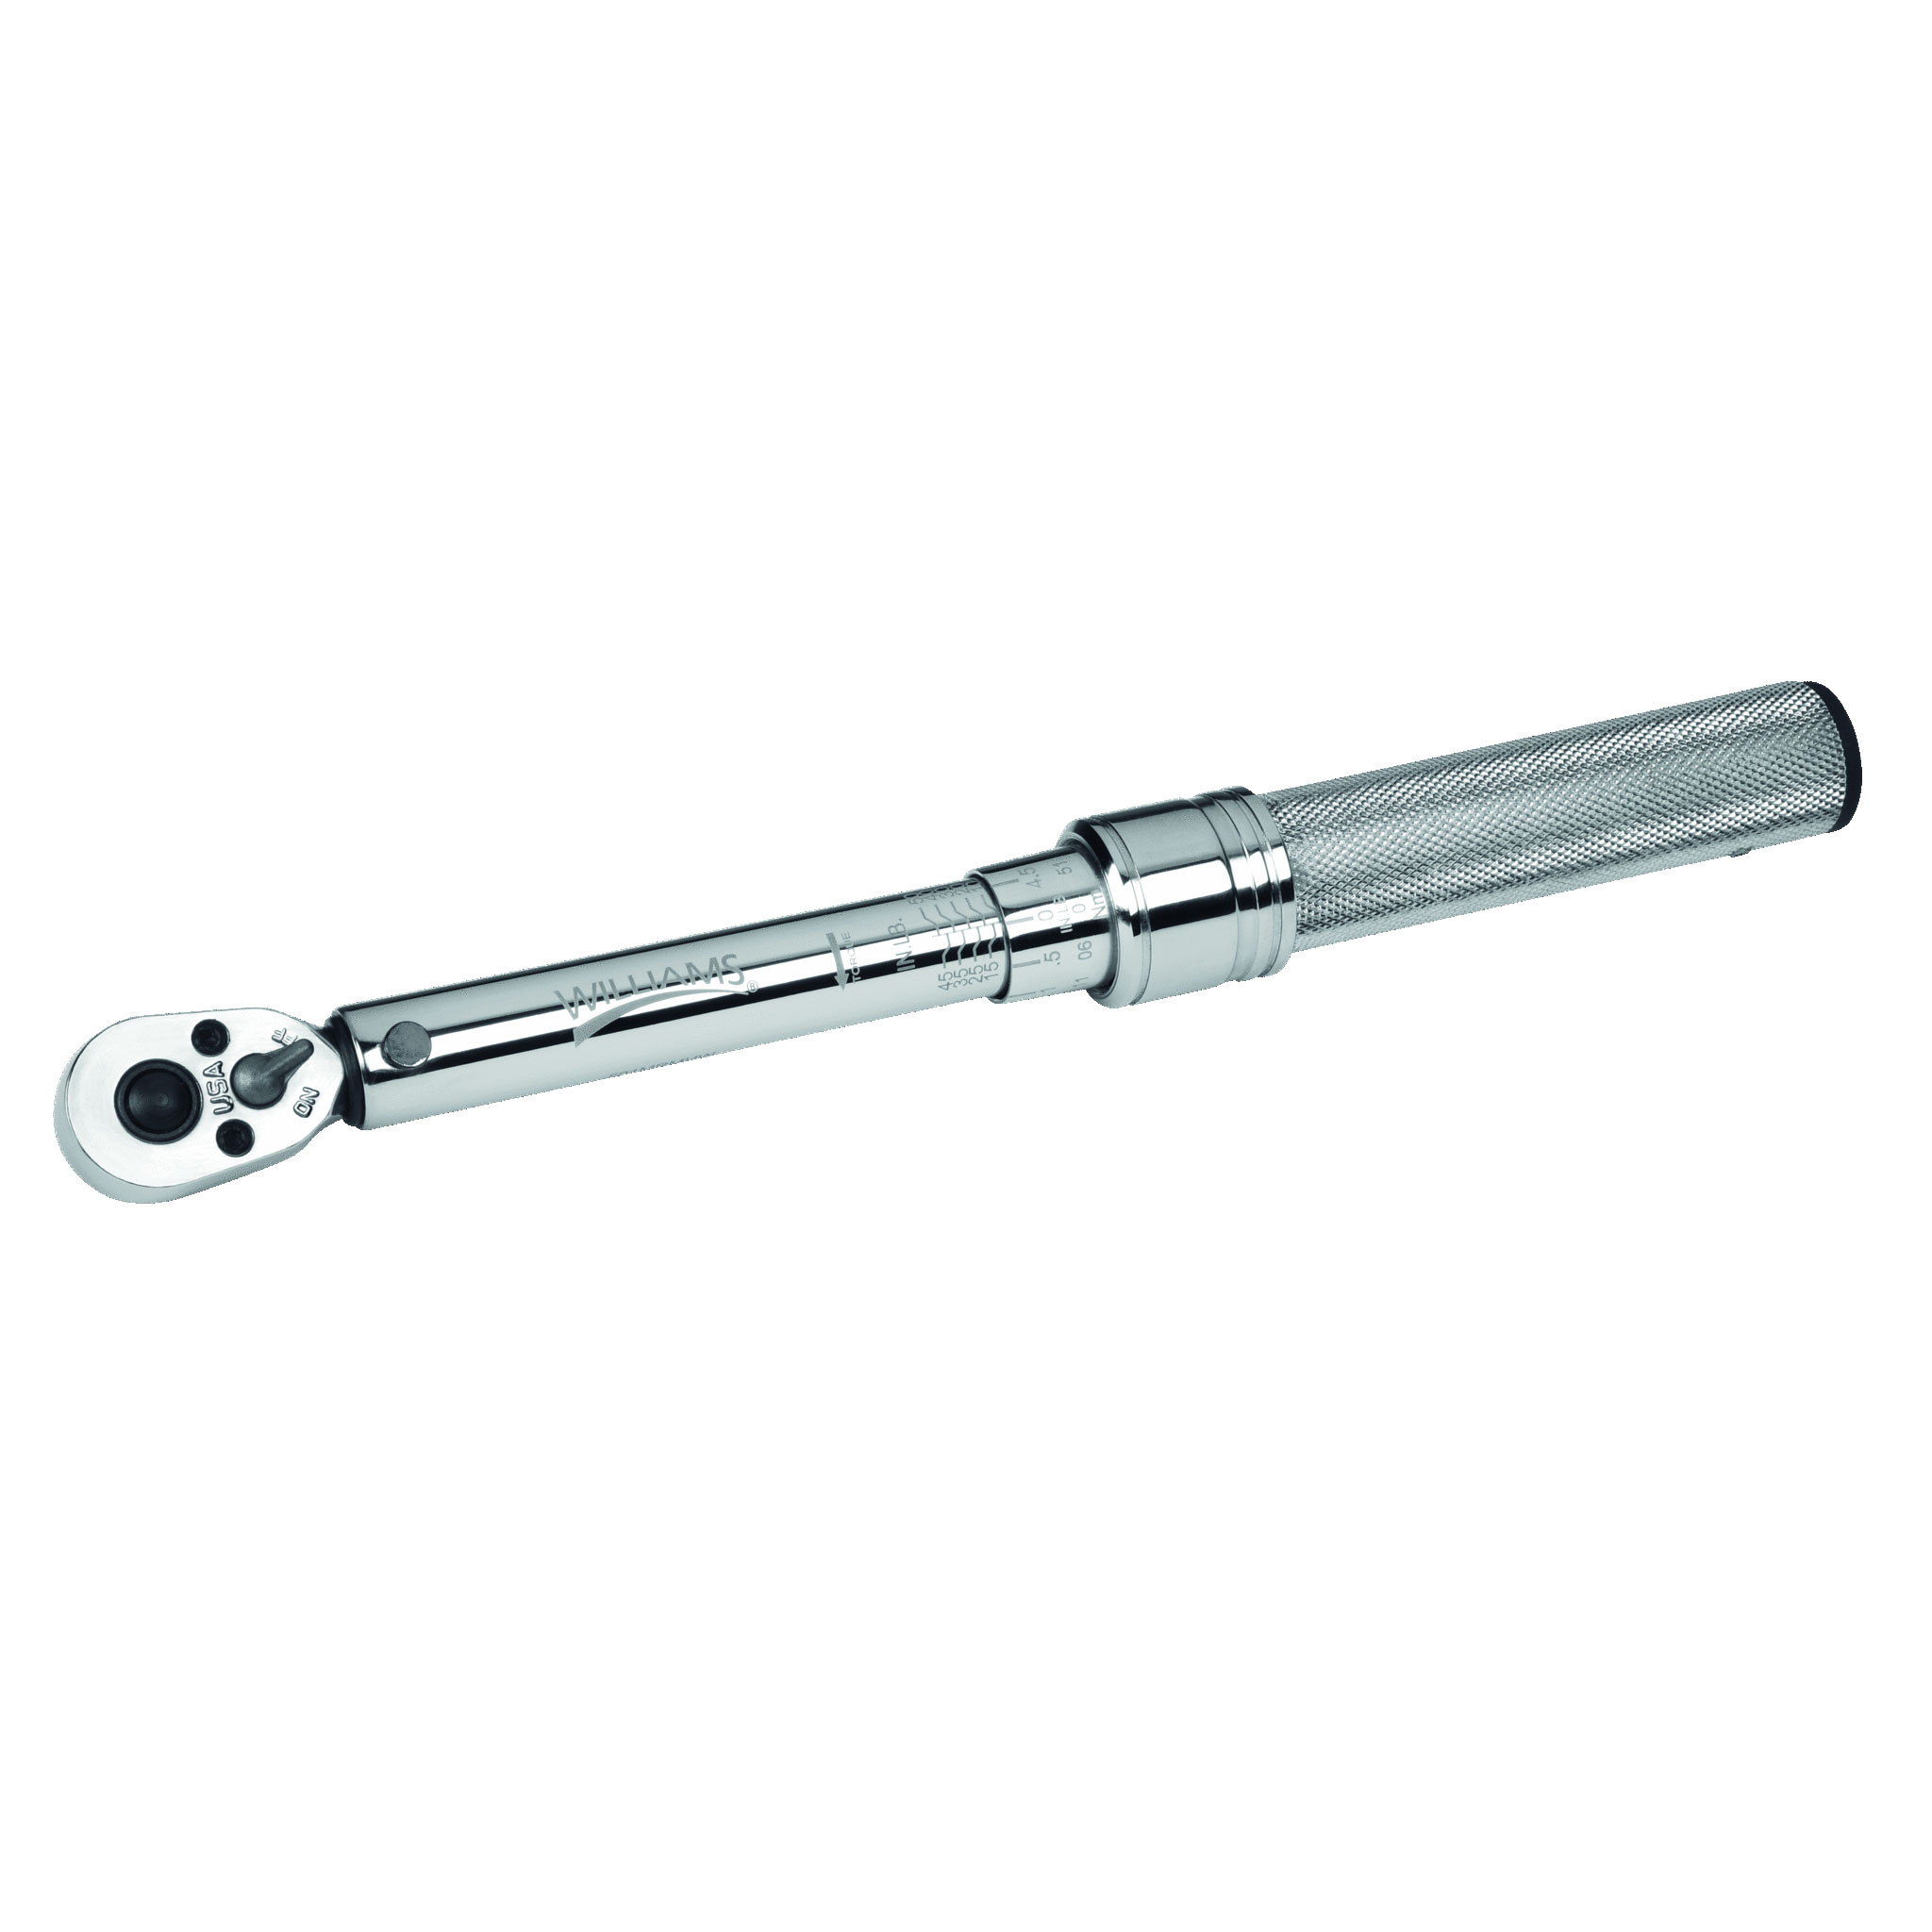 Snap-on Industrial Brands Torque Wrench, 3/8", 150-1000in.lb (19.8-110.2Nm)